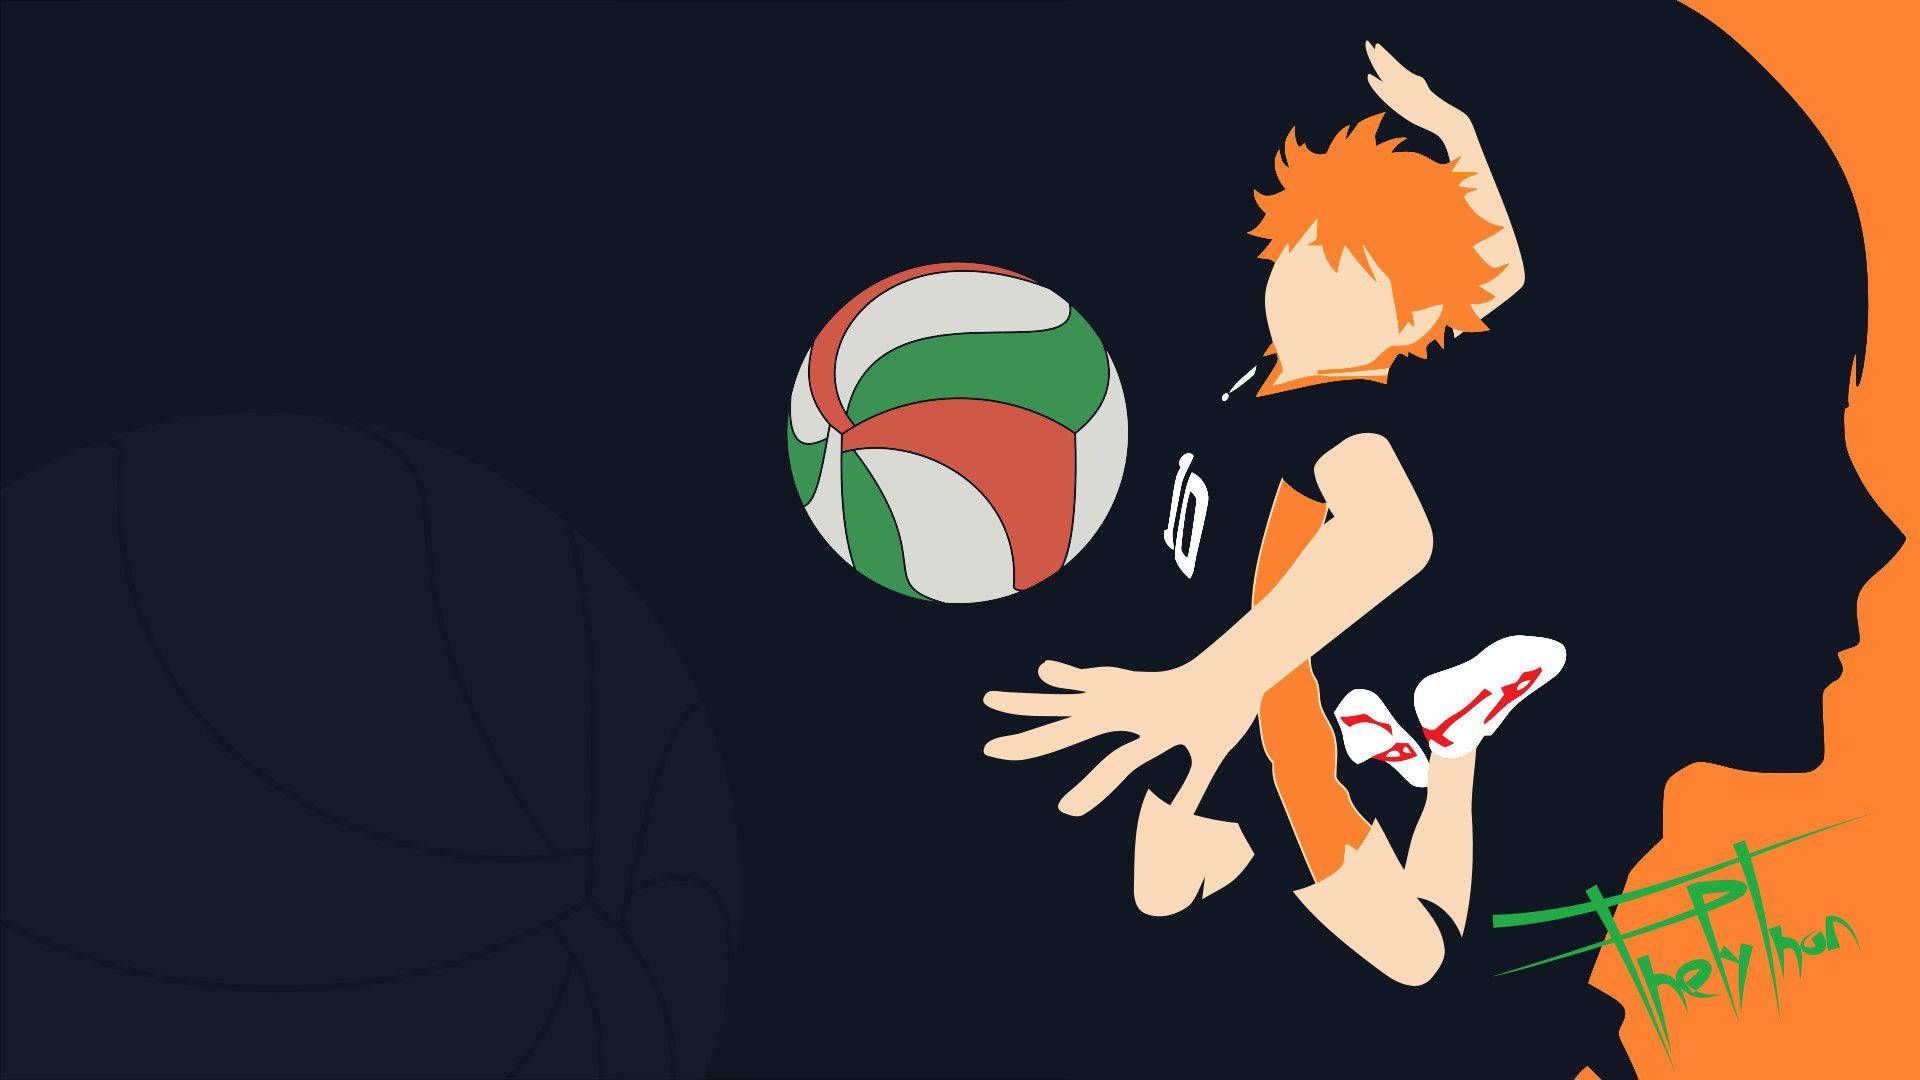 Hinata Shouyou, The Passionate Volleyball Player Determined To Reach His Dreams. Background